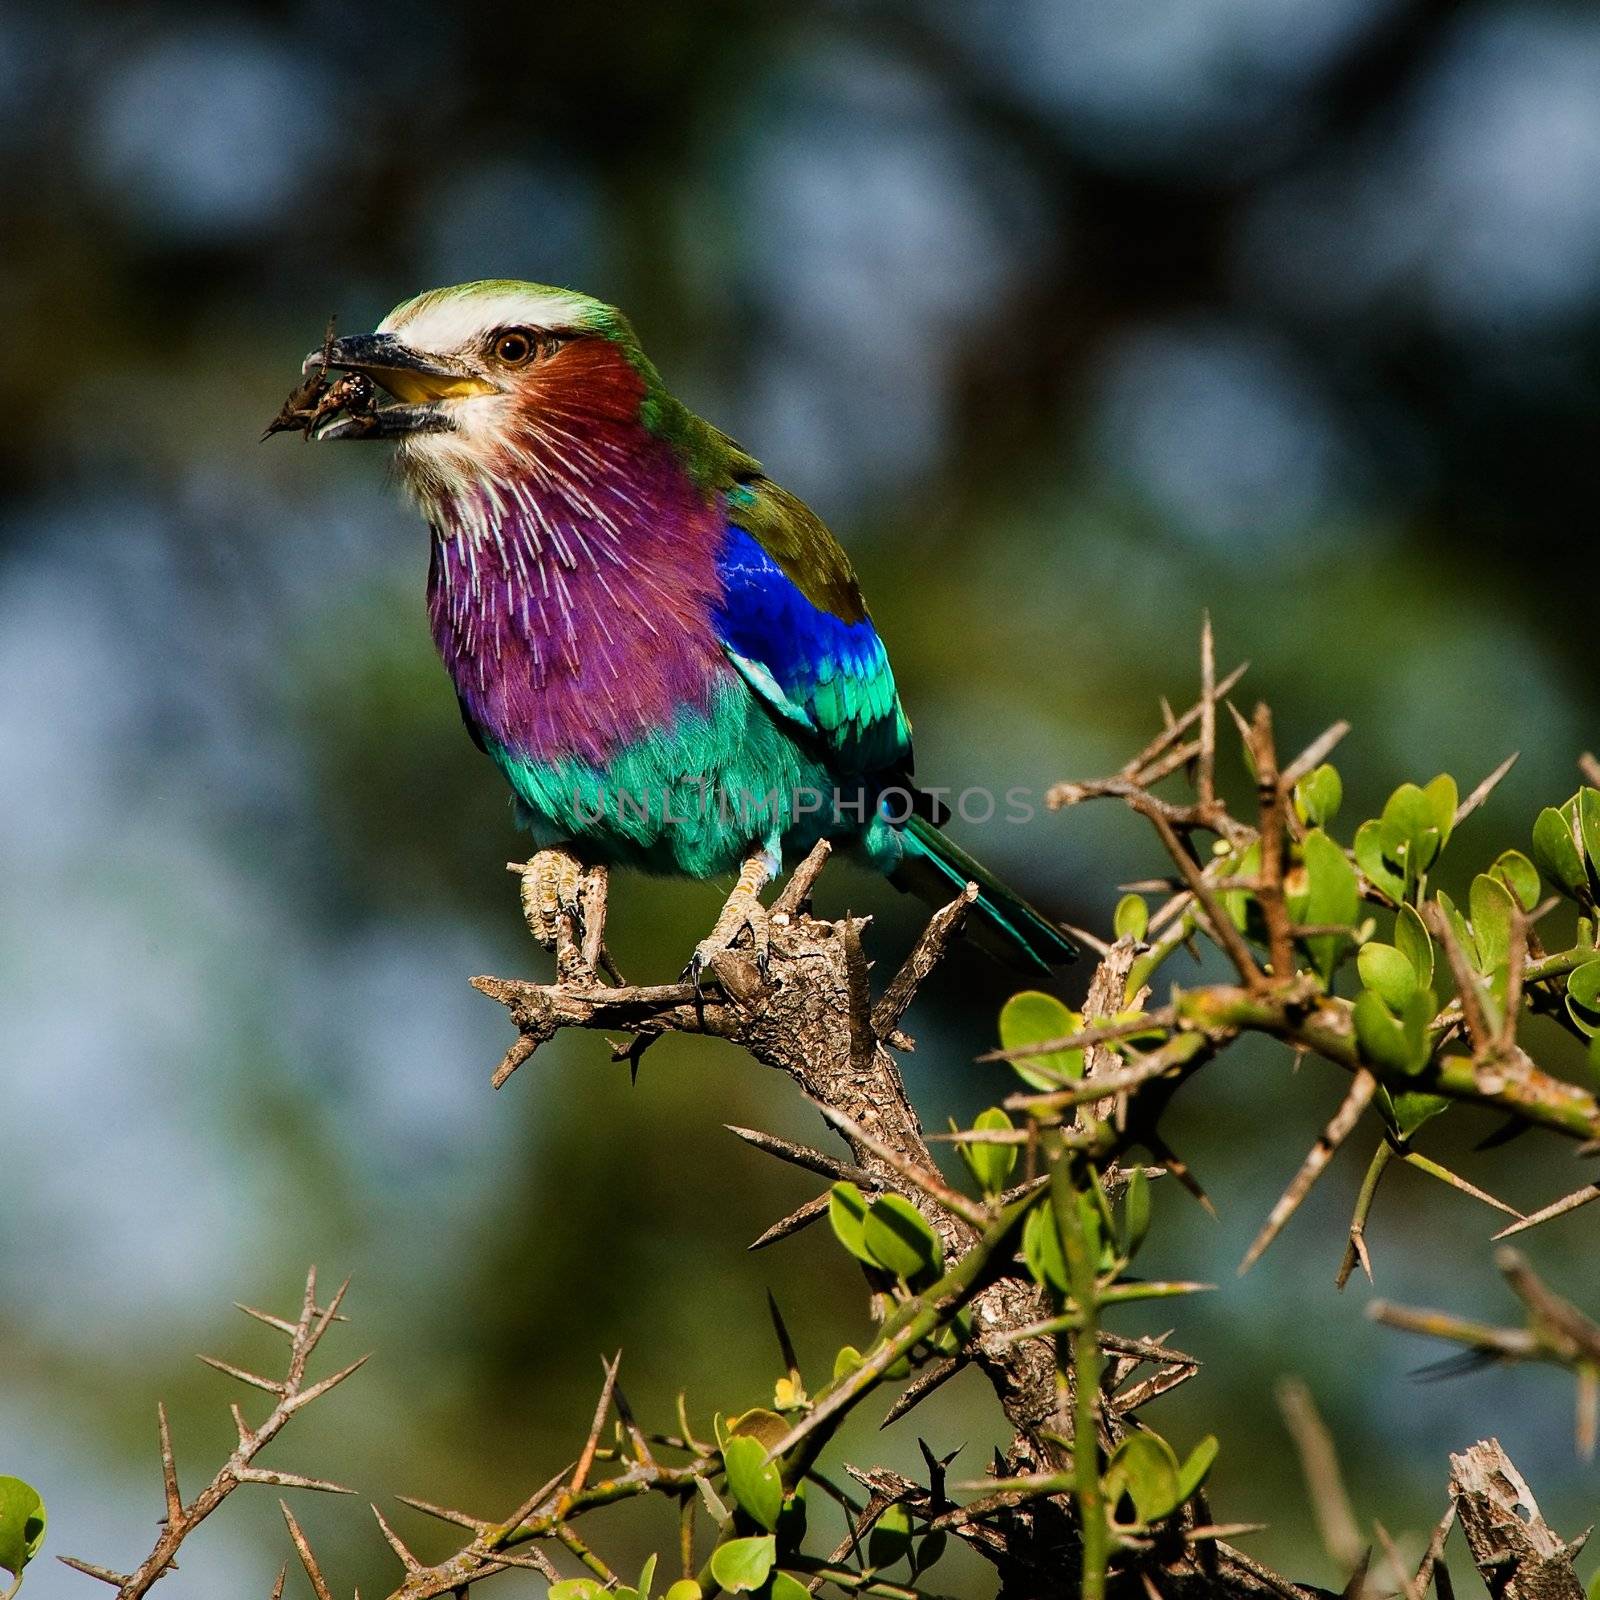 The bright colourful bird sits on a branch and holds in a beak of a cricket. A colourful background.